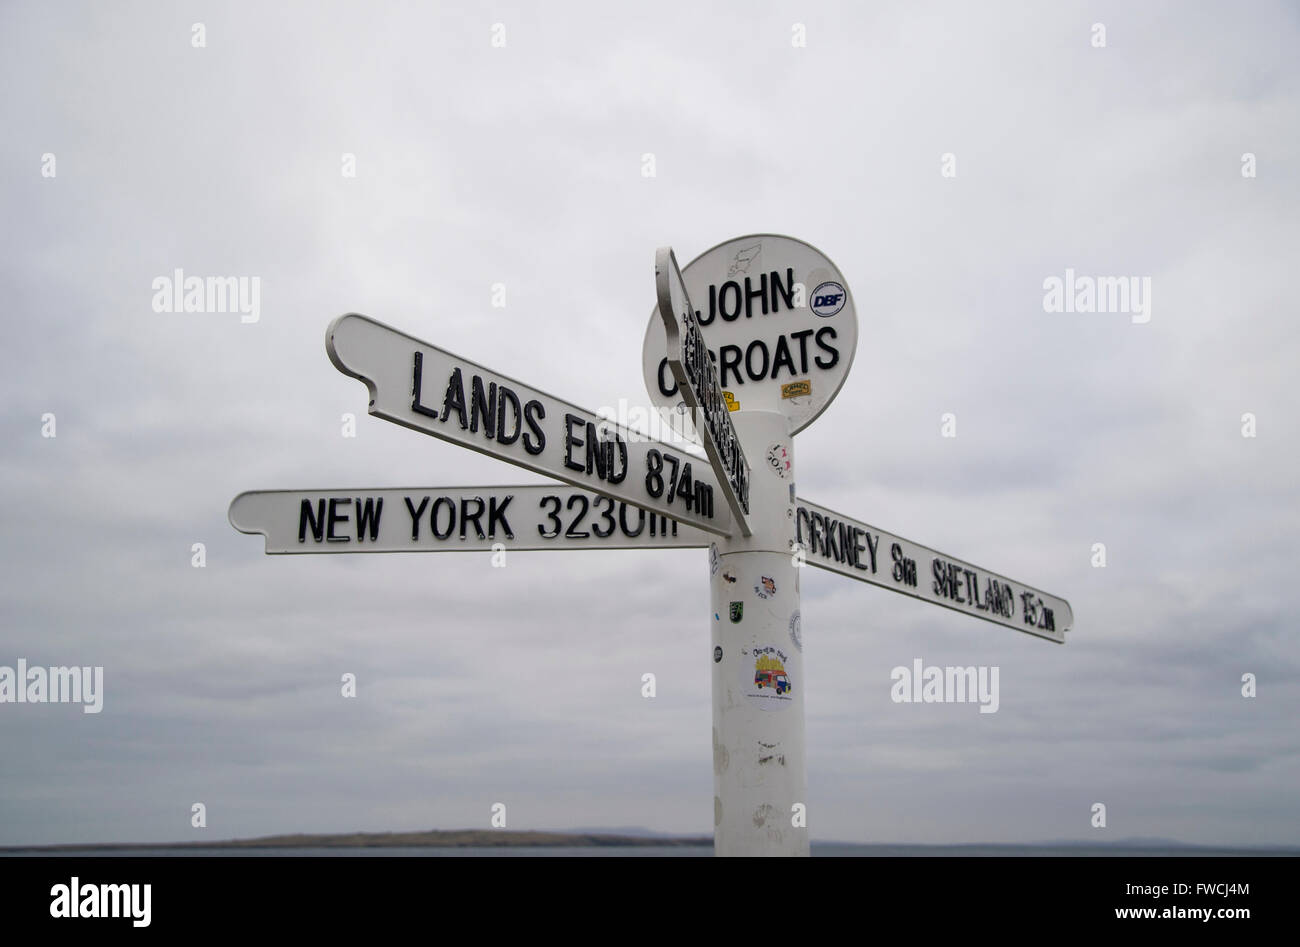 John O'Groats sign at the North Eastern tip of the British mainland, Scottish Highlands, North Coast 500 road trip driving route Stock Photo